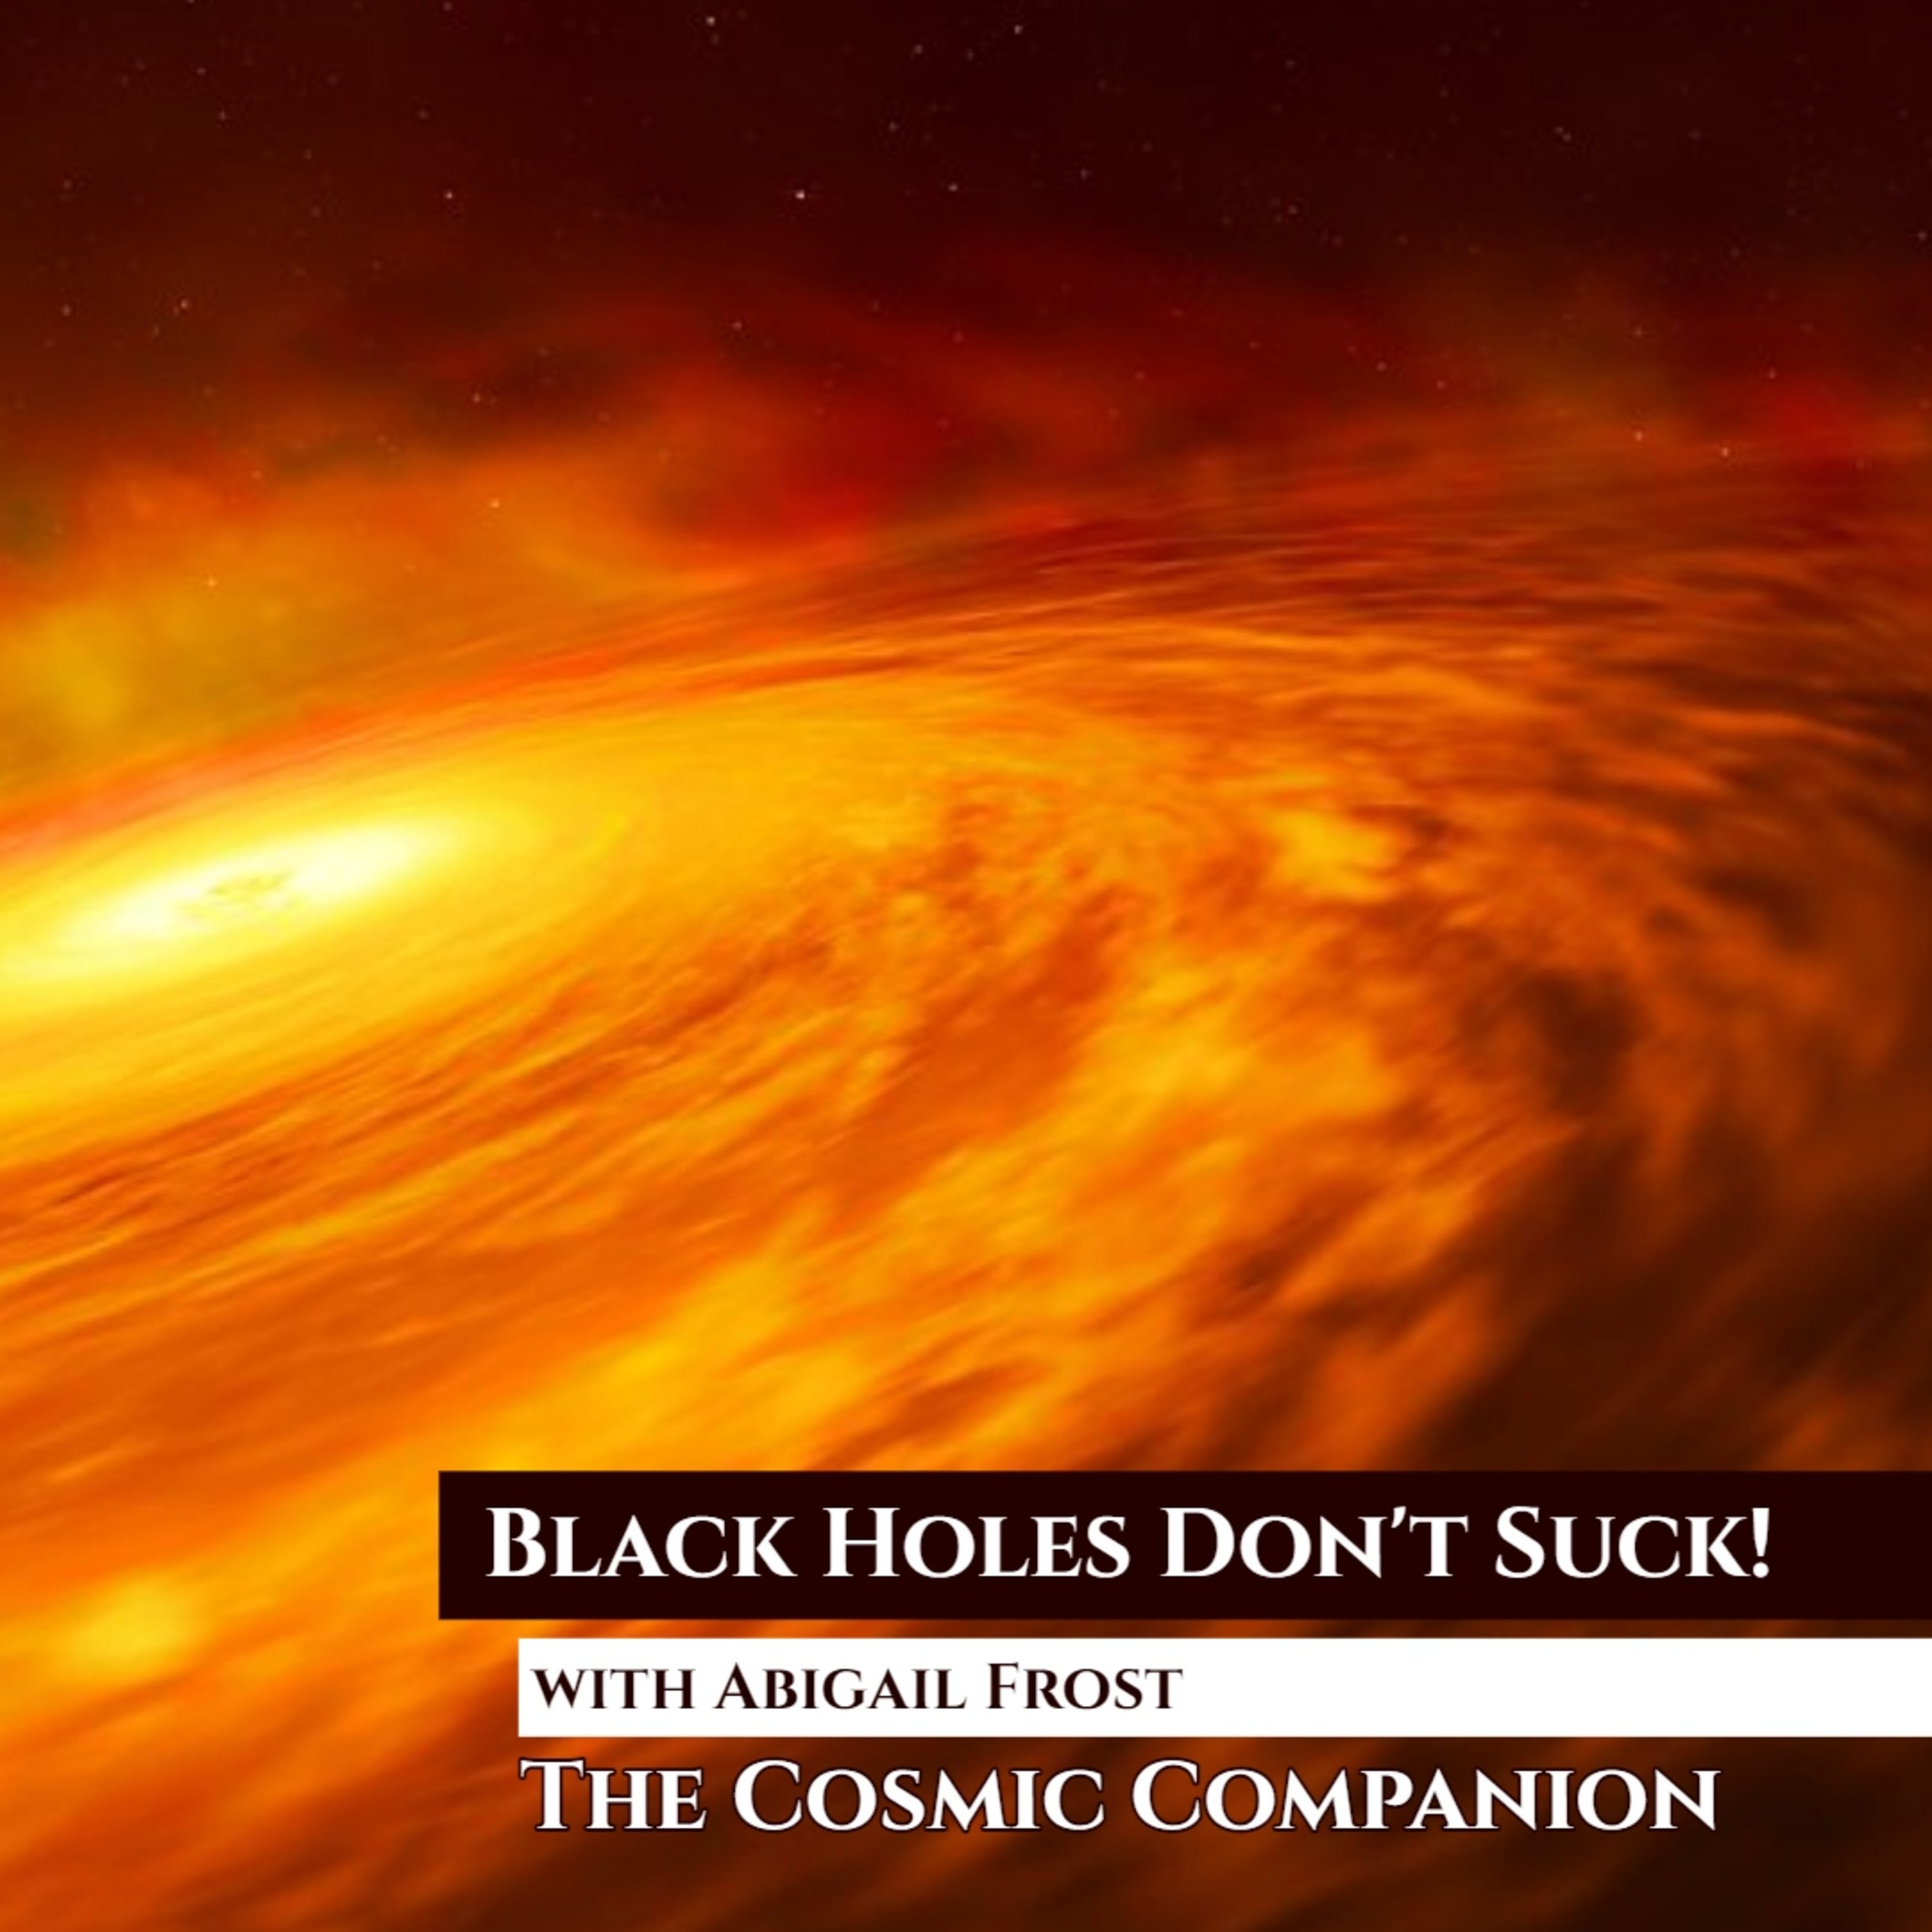 Black Holes Don't Suck - with Abigail Frost - The Cosmic Companion 29 March 2022